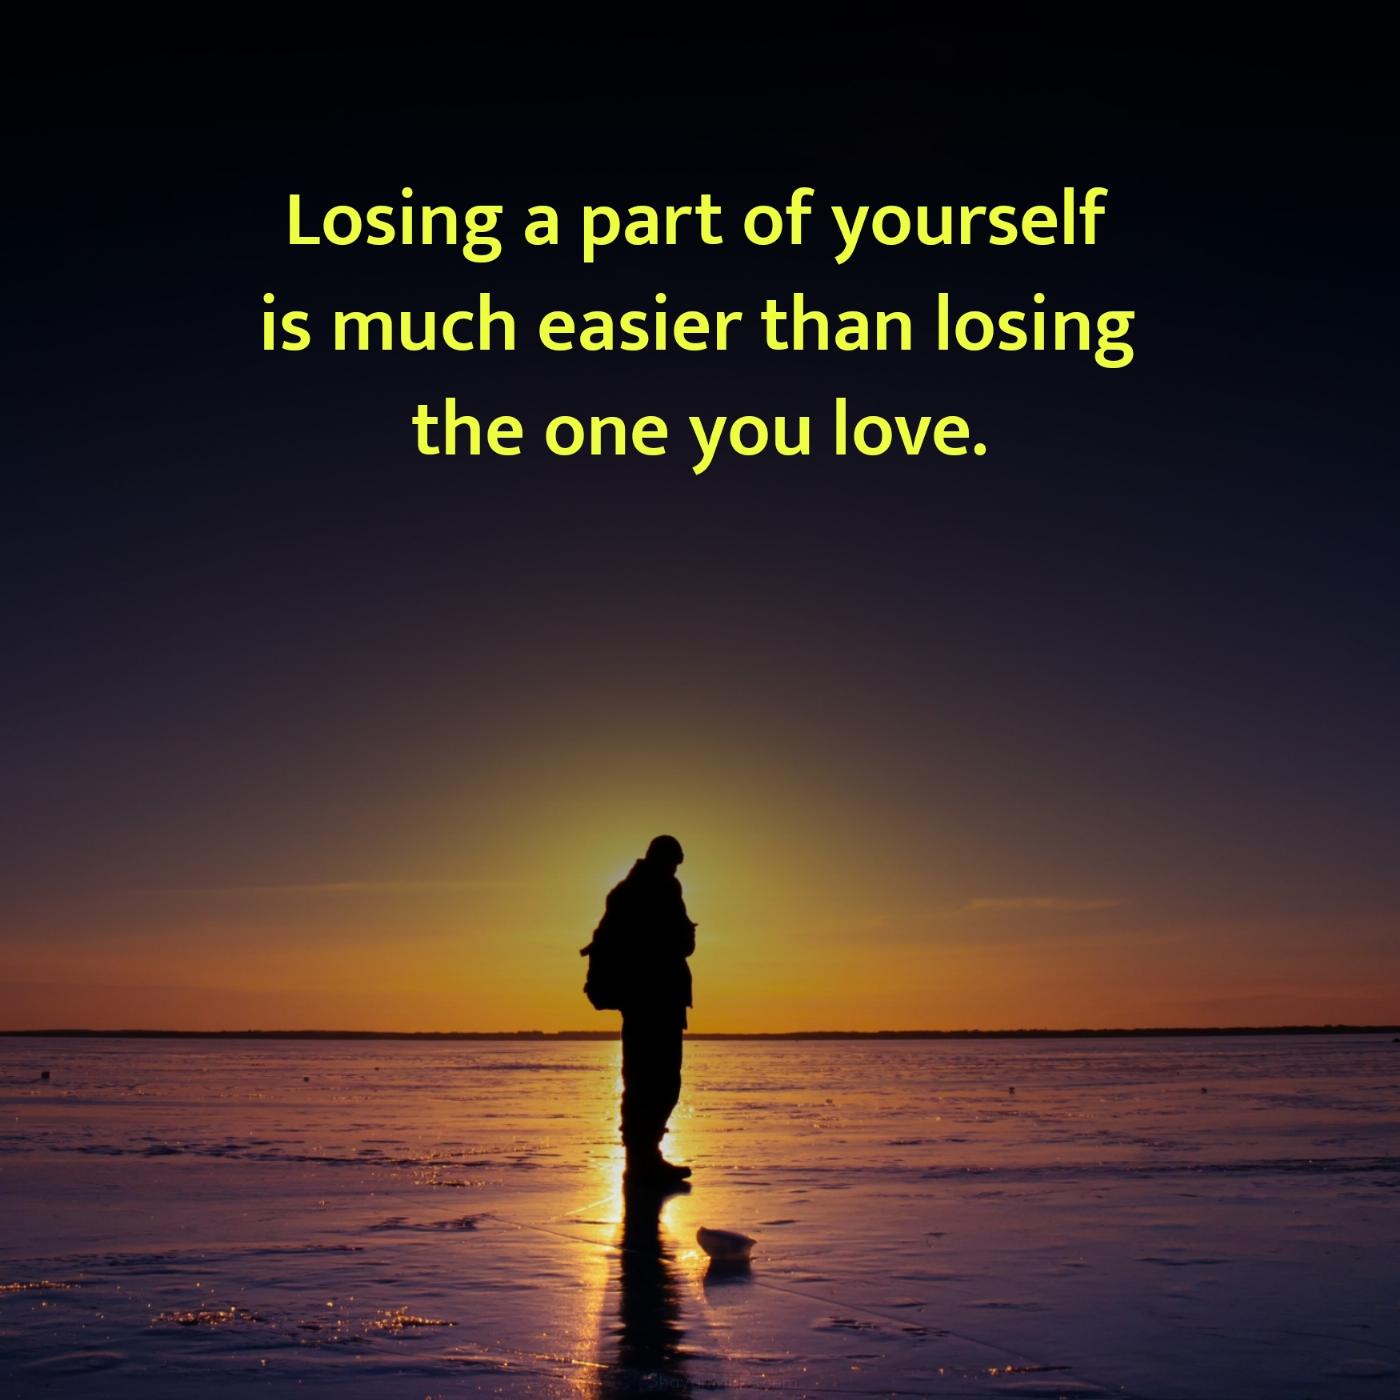 Losing a part of yourself is much easier than losing the one you love